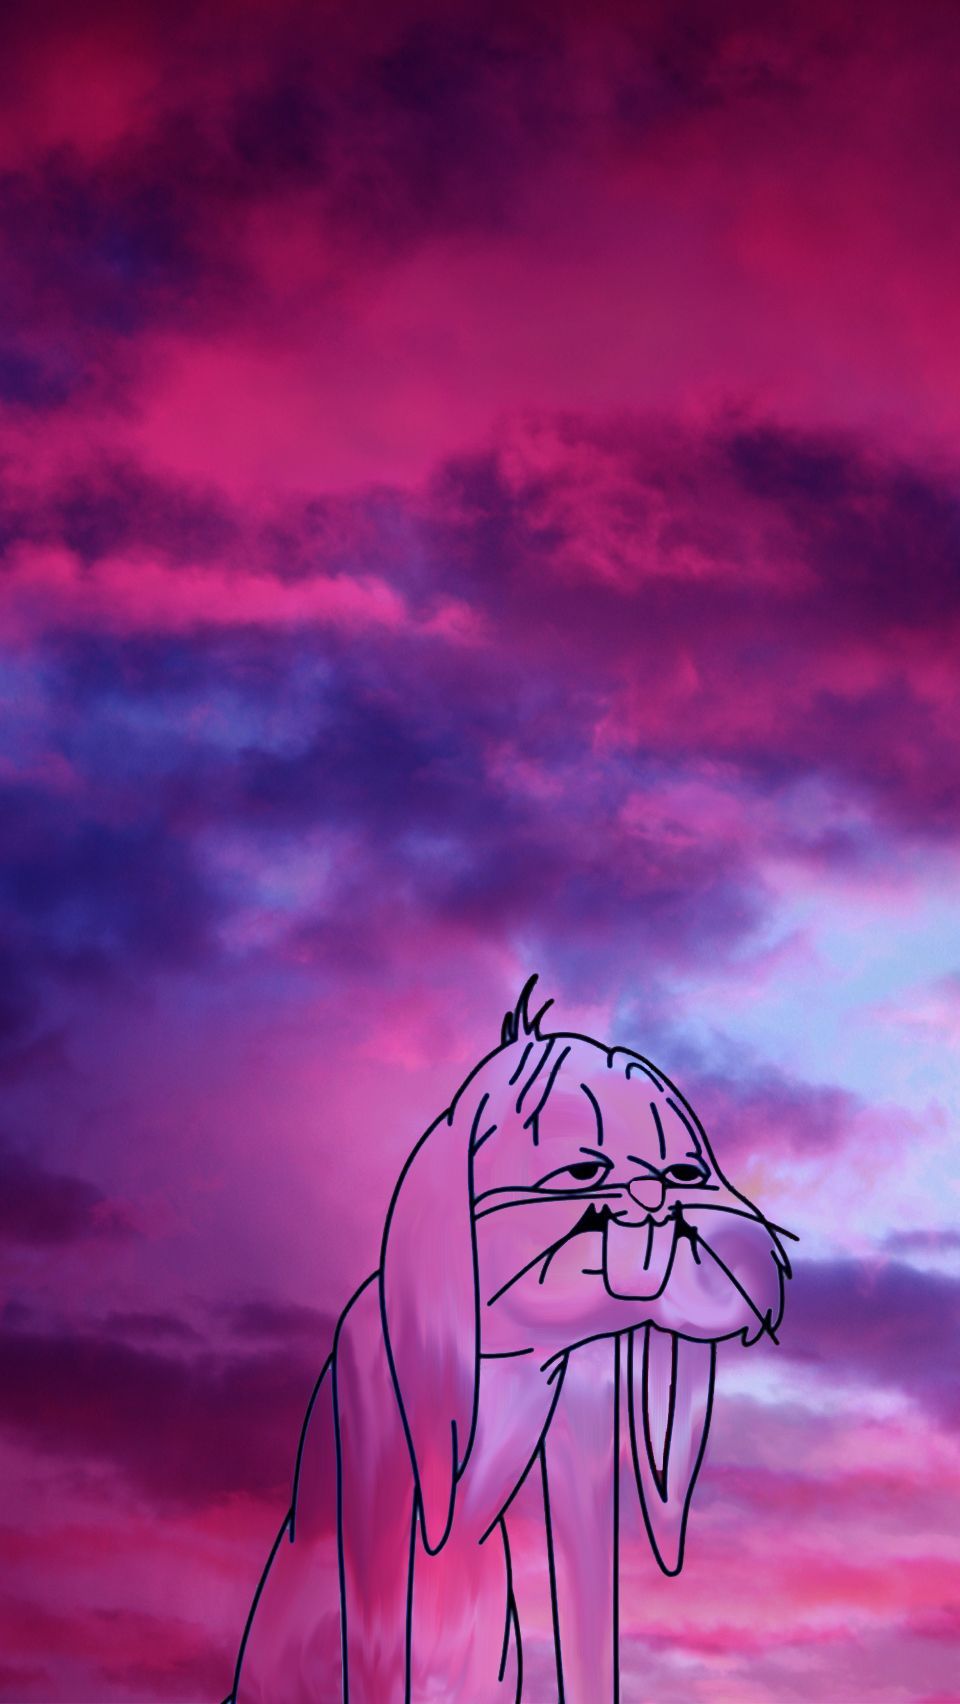 Aesthetic wallpaper of pink bunny against a pink and purple sky - Bugs Bunny